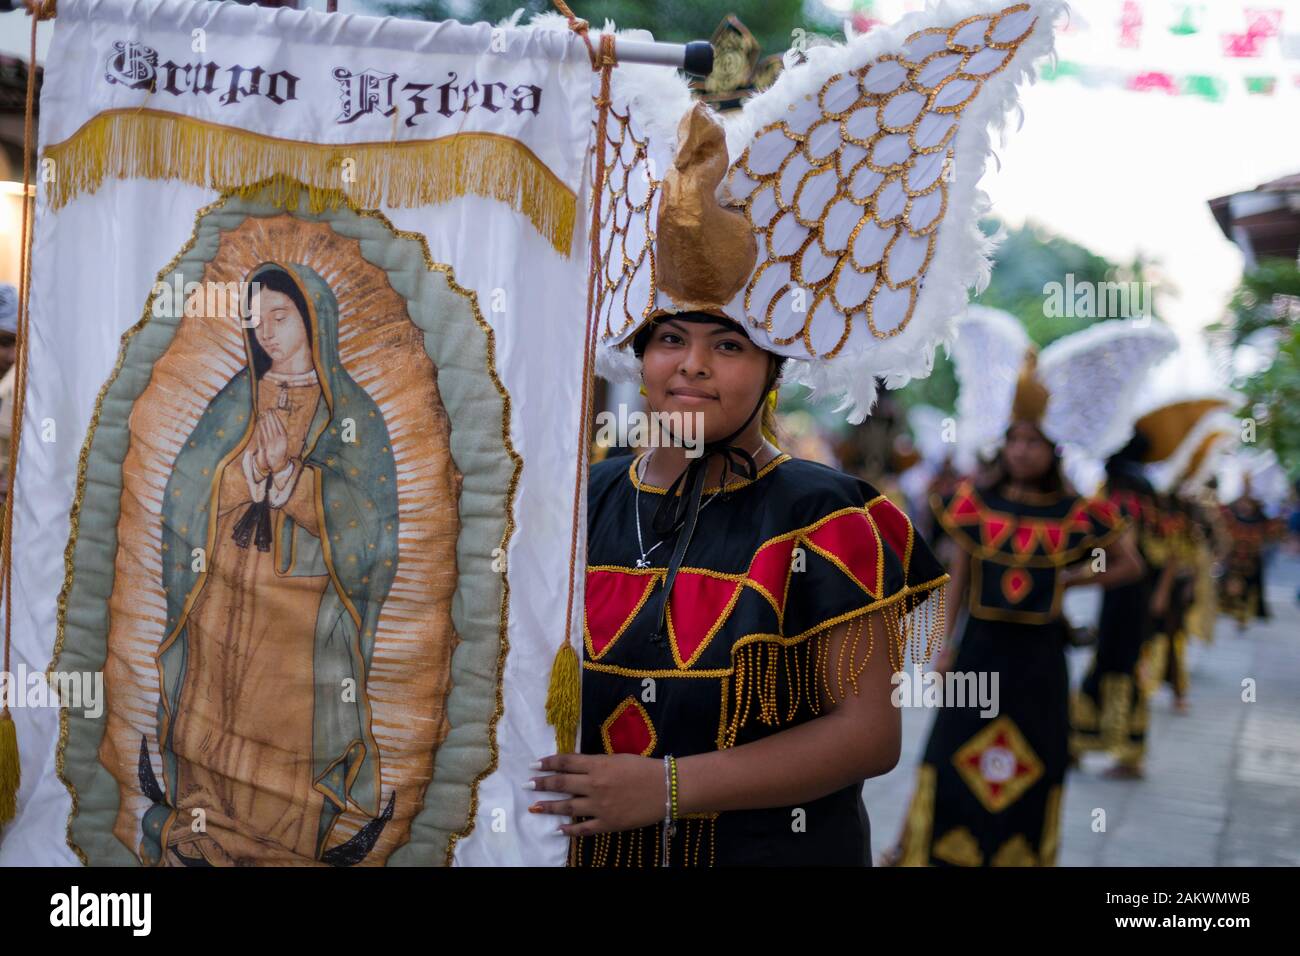 Mexico, Puerto Vallarta, Jalisco, indigenous participant taking part in the festival 'Our Lady of Guadalupe' Stock Photo